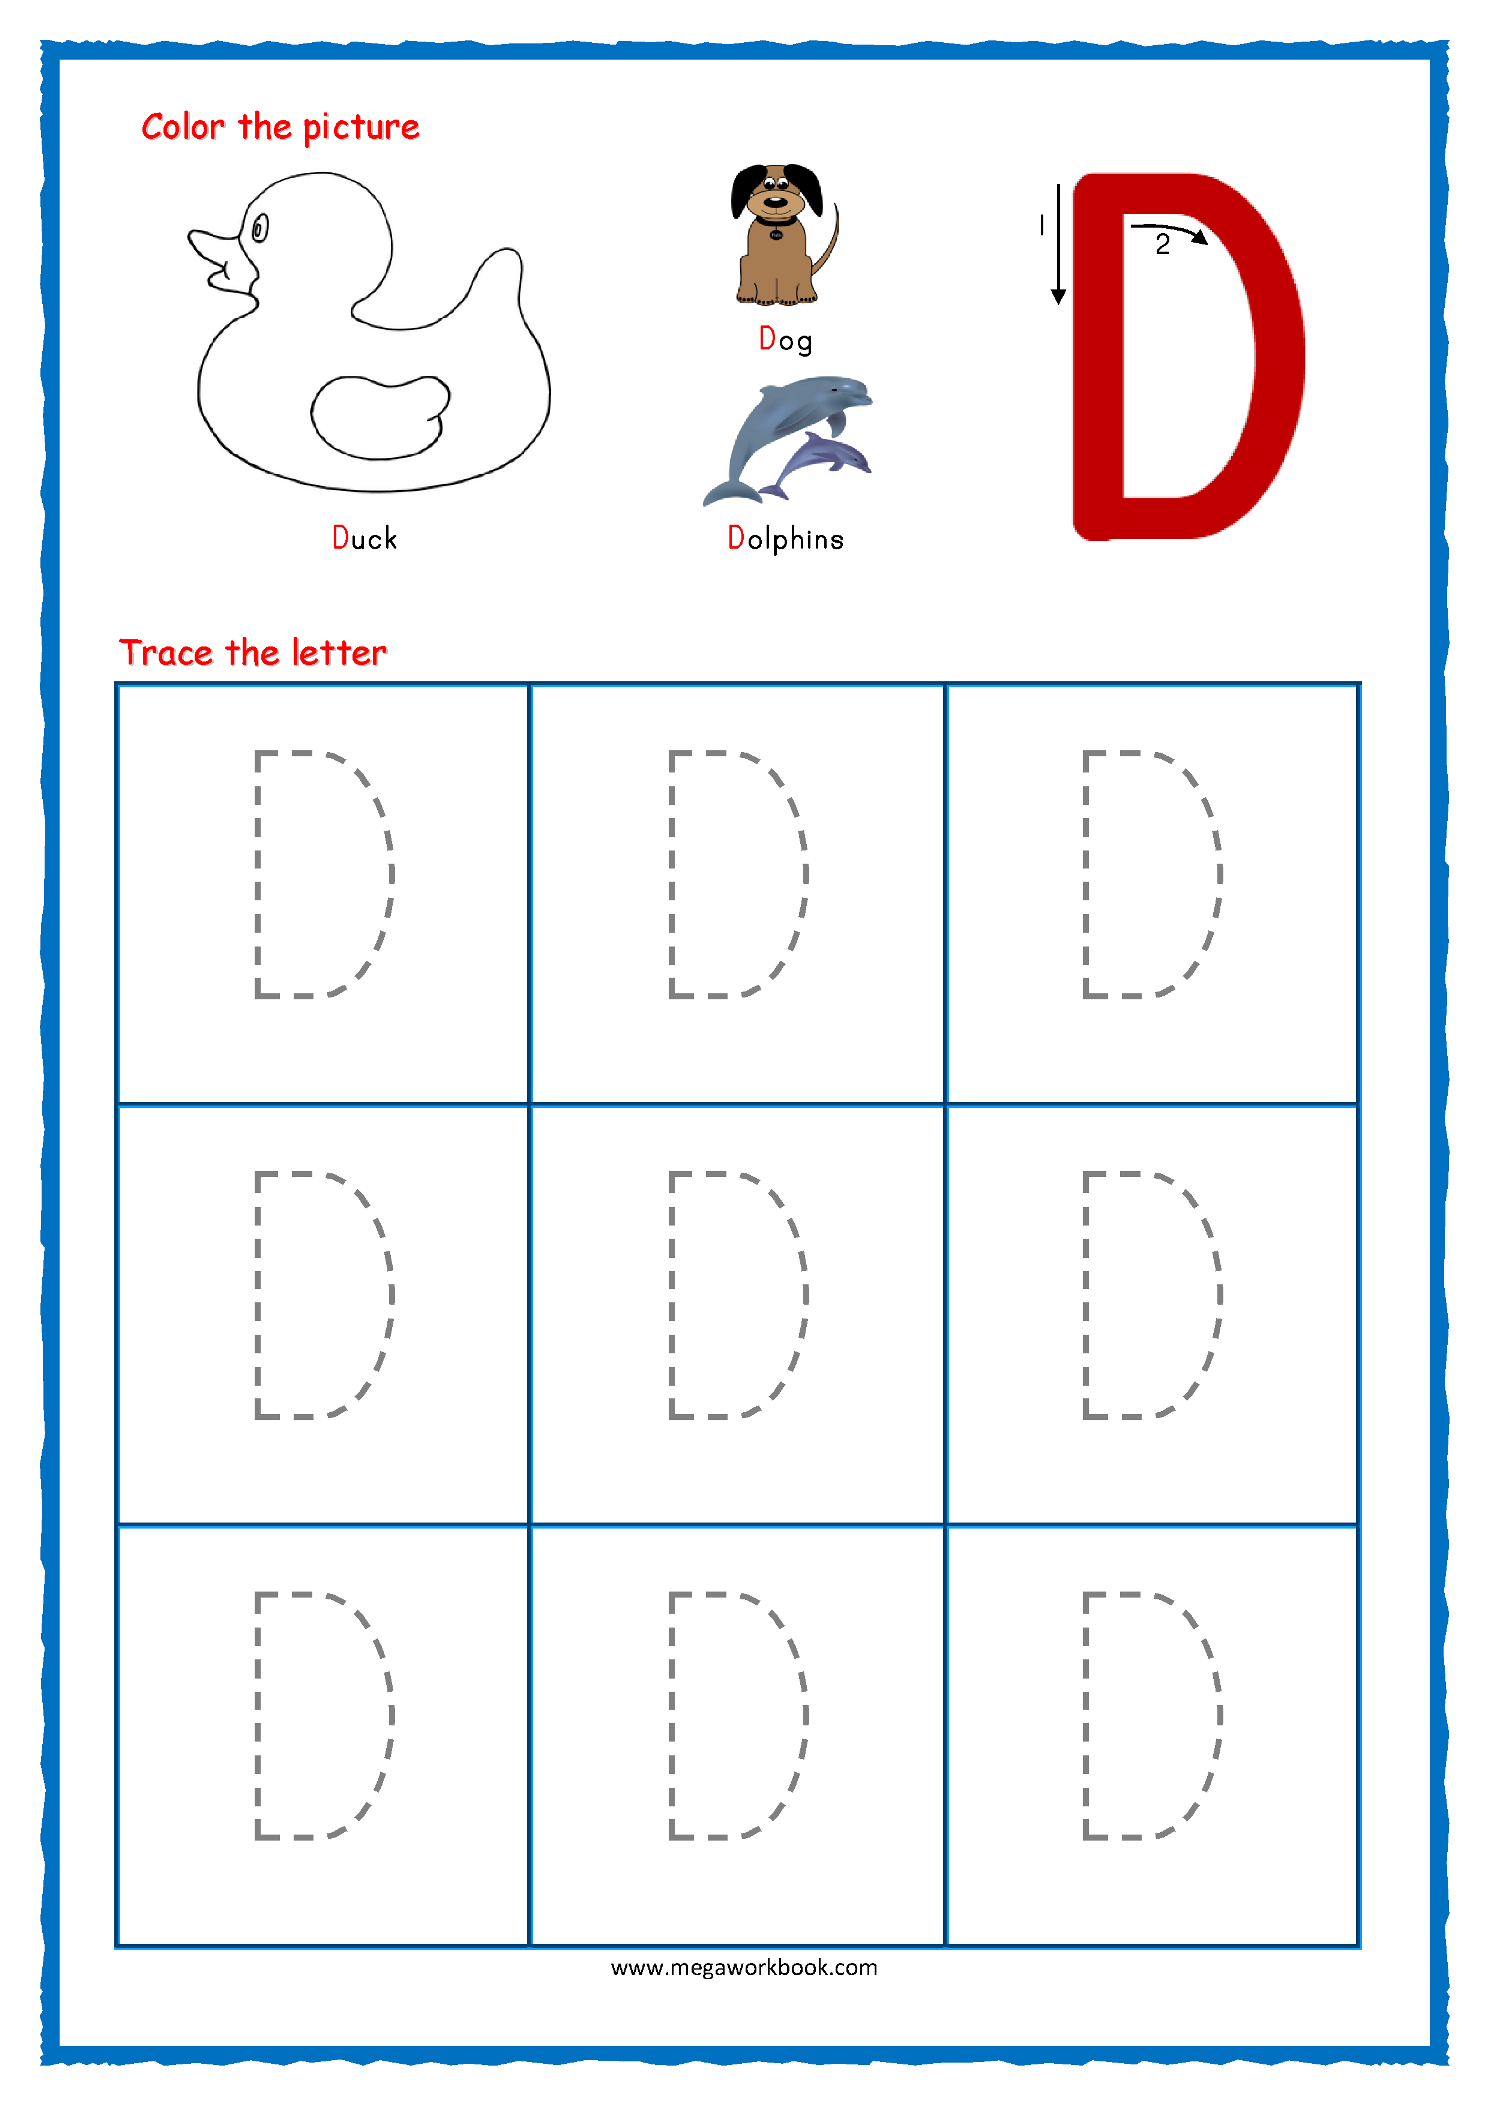 Tracing Letters - Alphabet Tracing - Capital Letters with regard to Tracing Letter I Worksheets Free